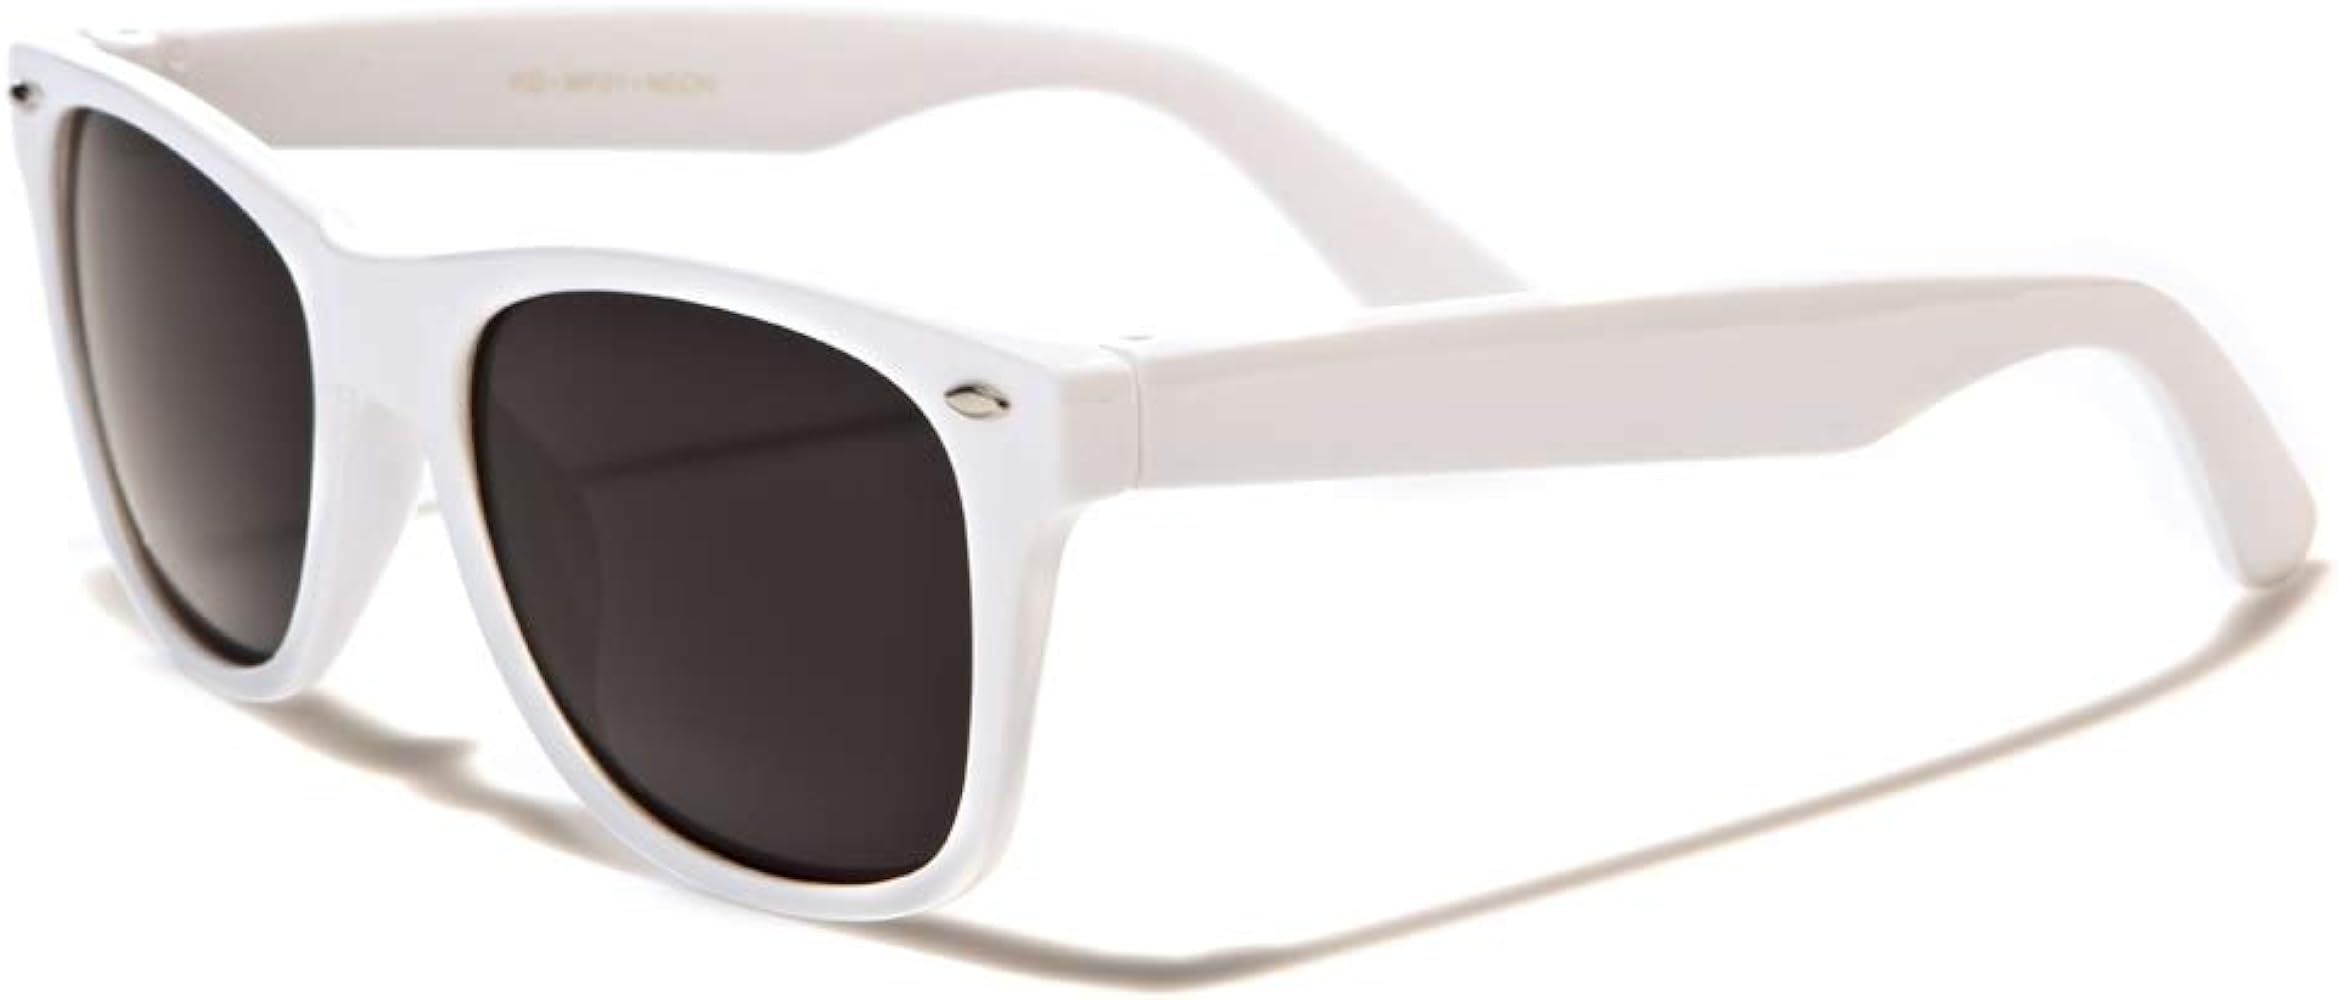 Kids Sunglasses Rated Ages 3-8 | Amazon (US)